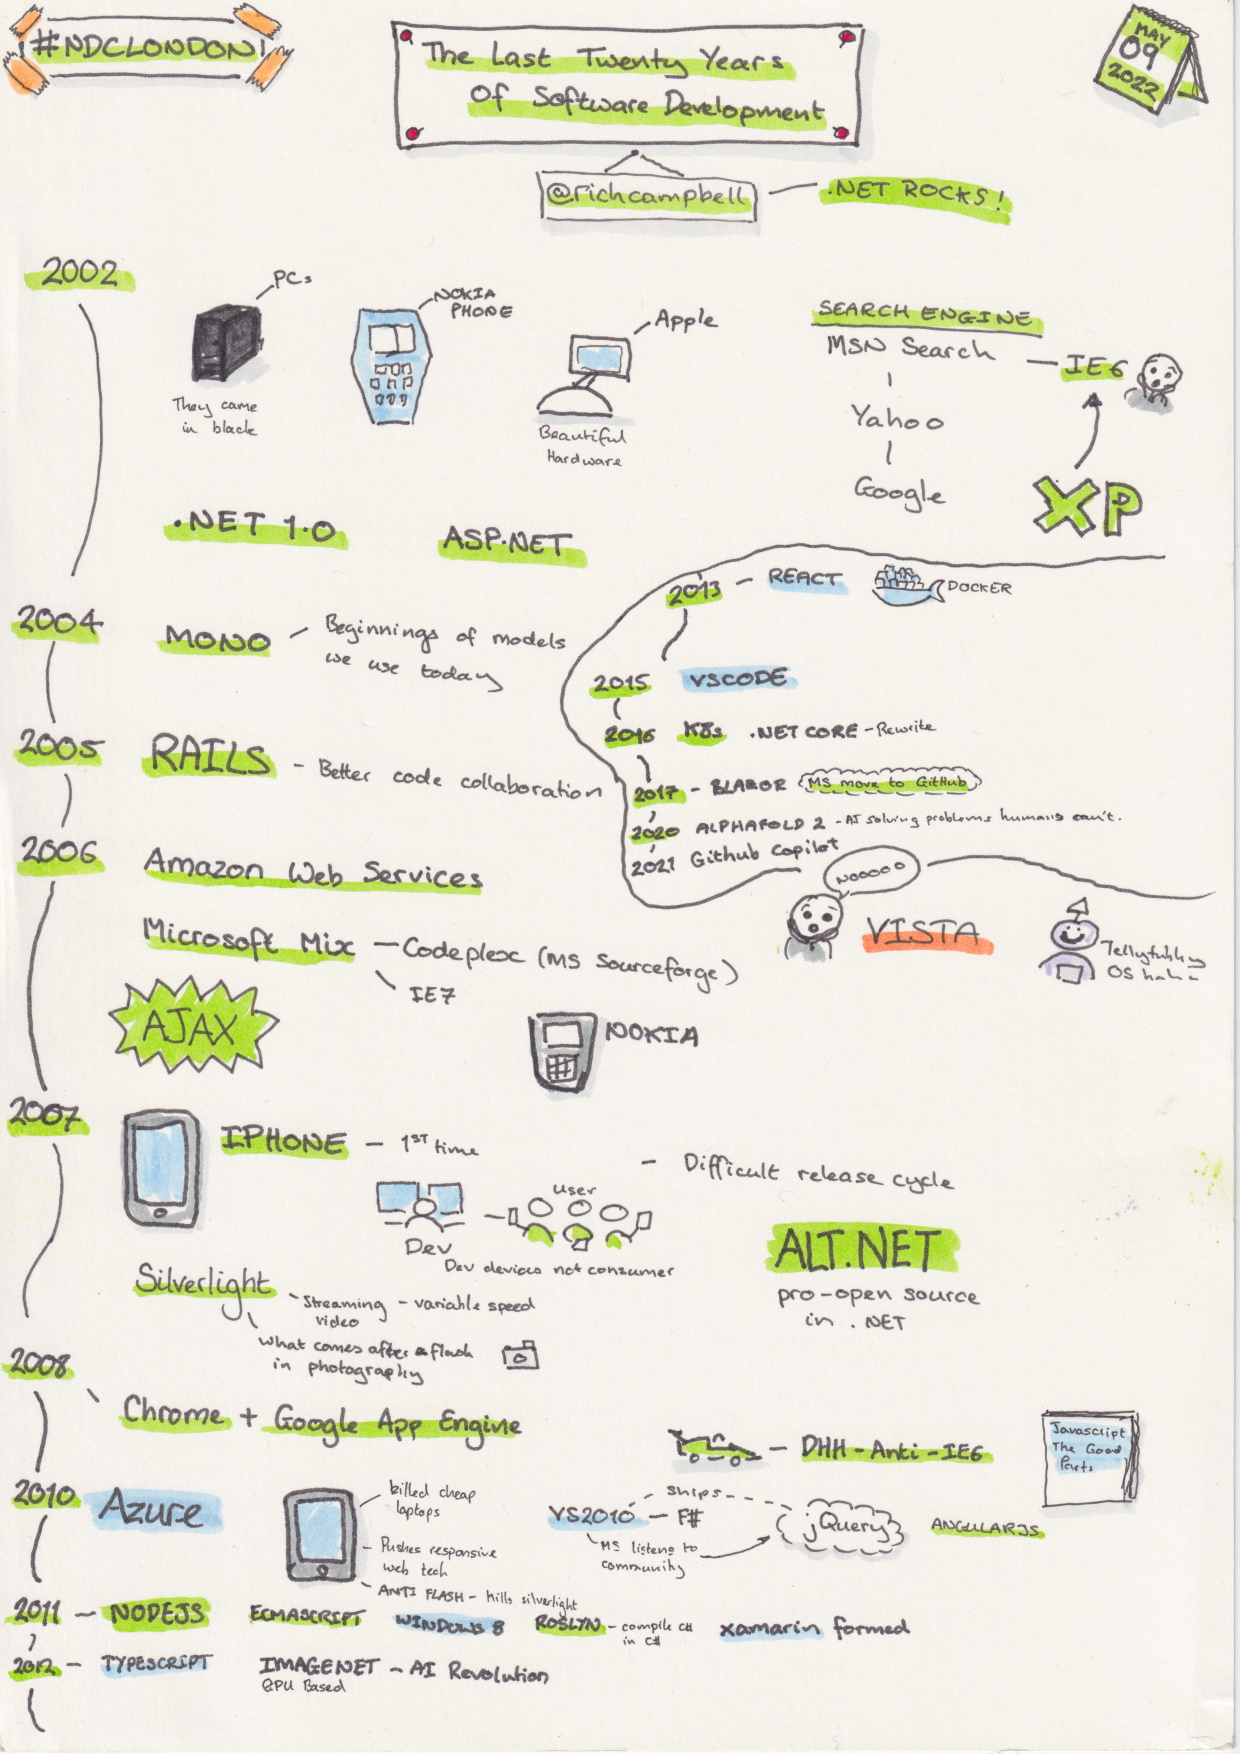 Sketchnotes from the talk 'The Last 20 Years of Software Development' by Richard Collins at NDC London 2022